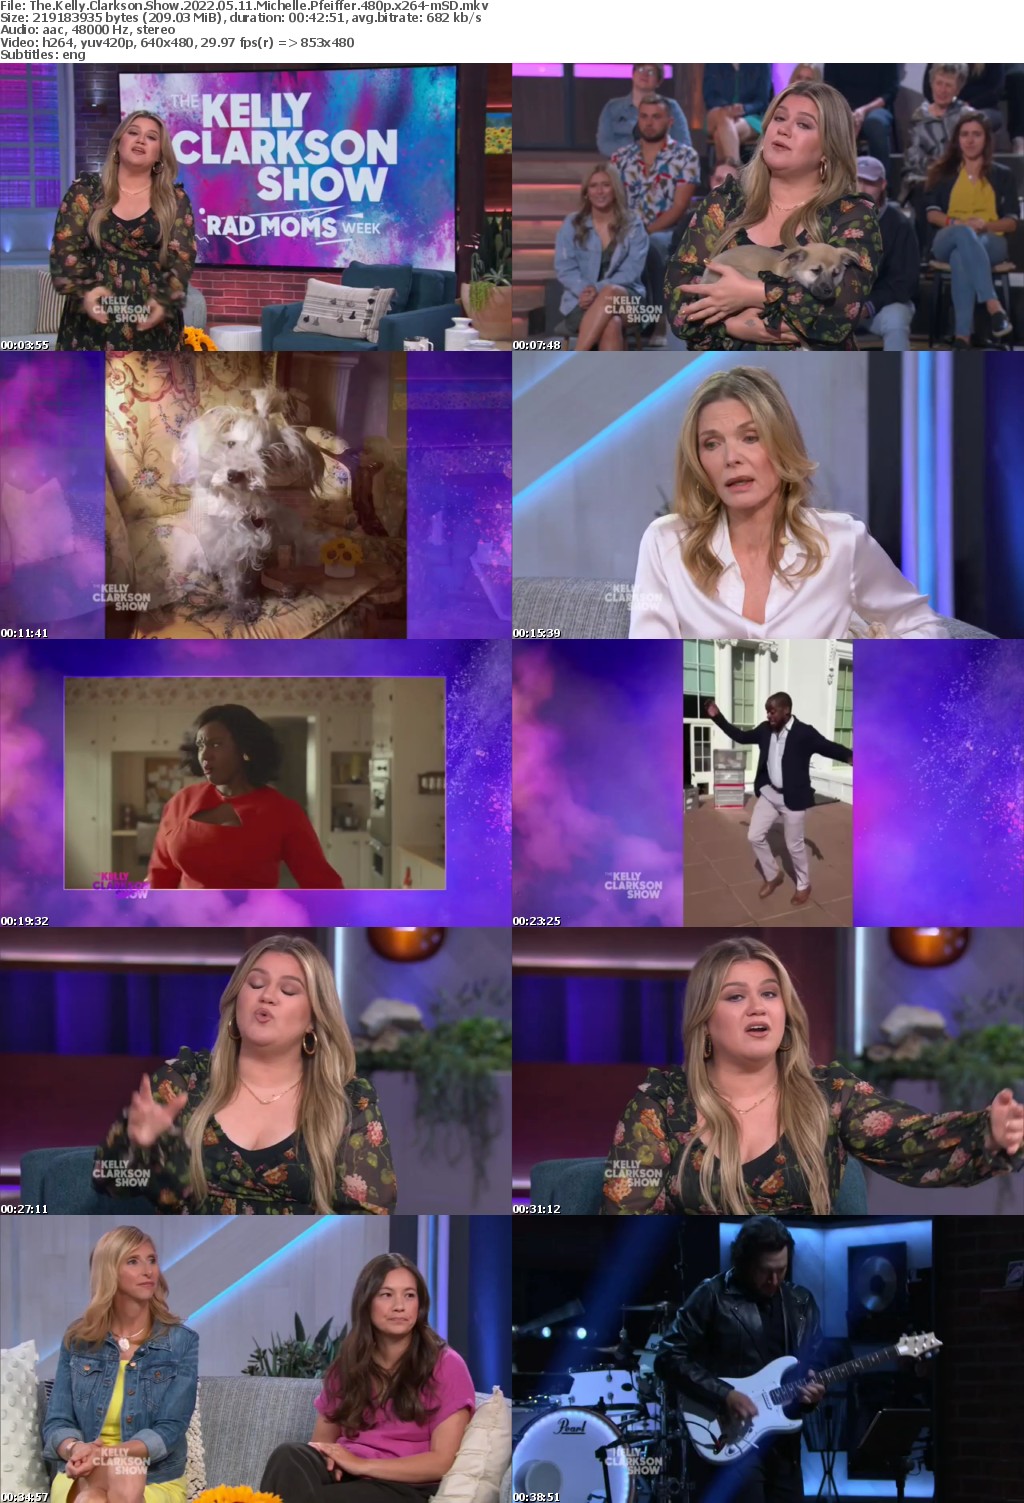 The Kelly Clarkson Show 2022 05 11 Michelle Pfeiffer 480p x264-mSD